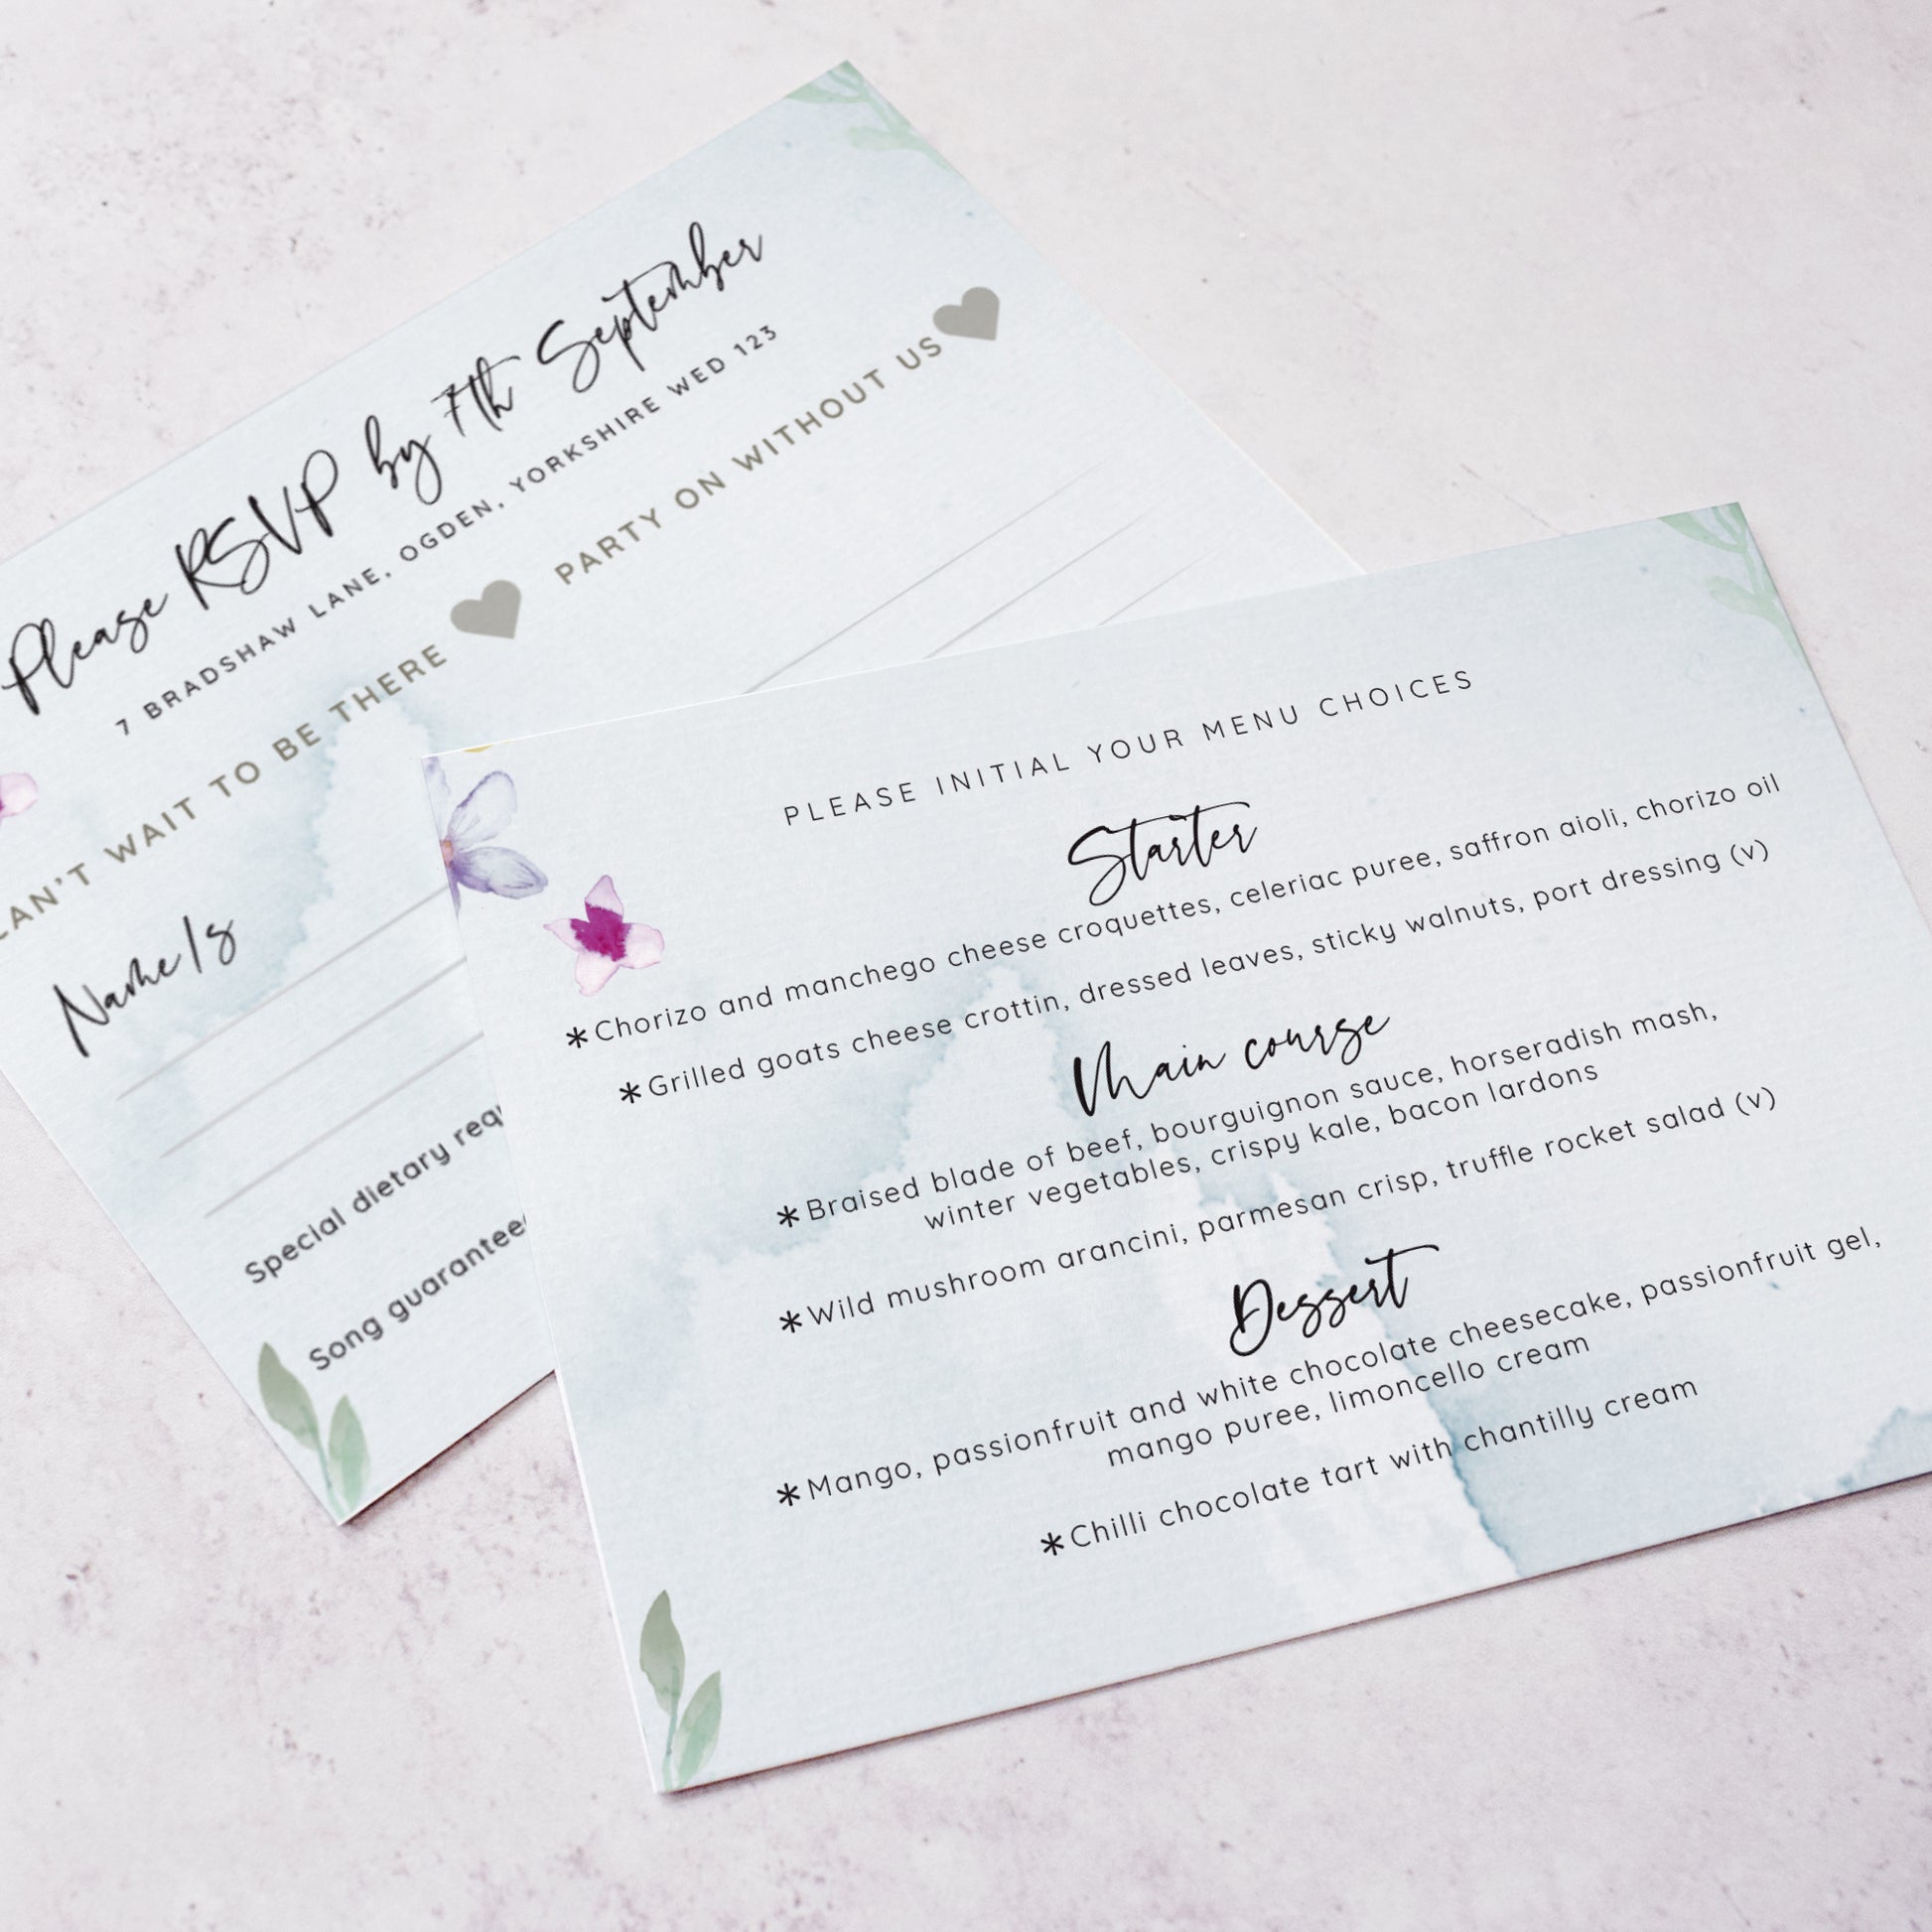 RSVP cards from our "flower press' wedding stationery collection